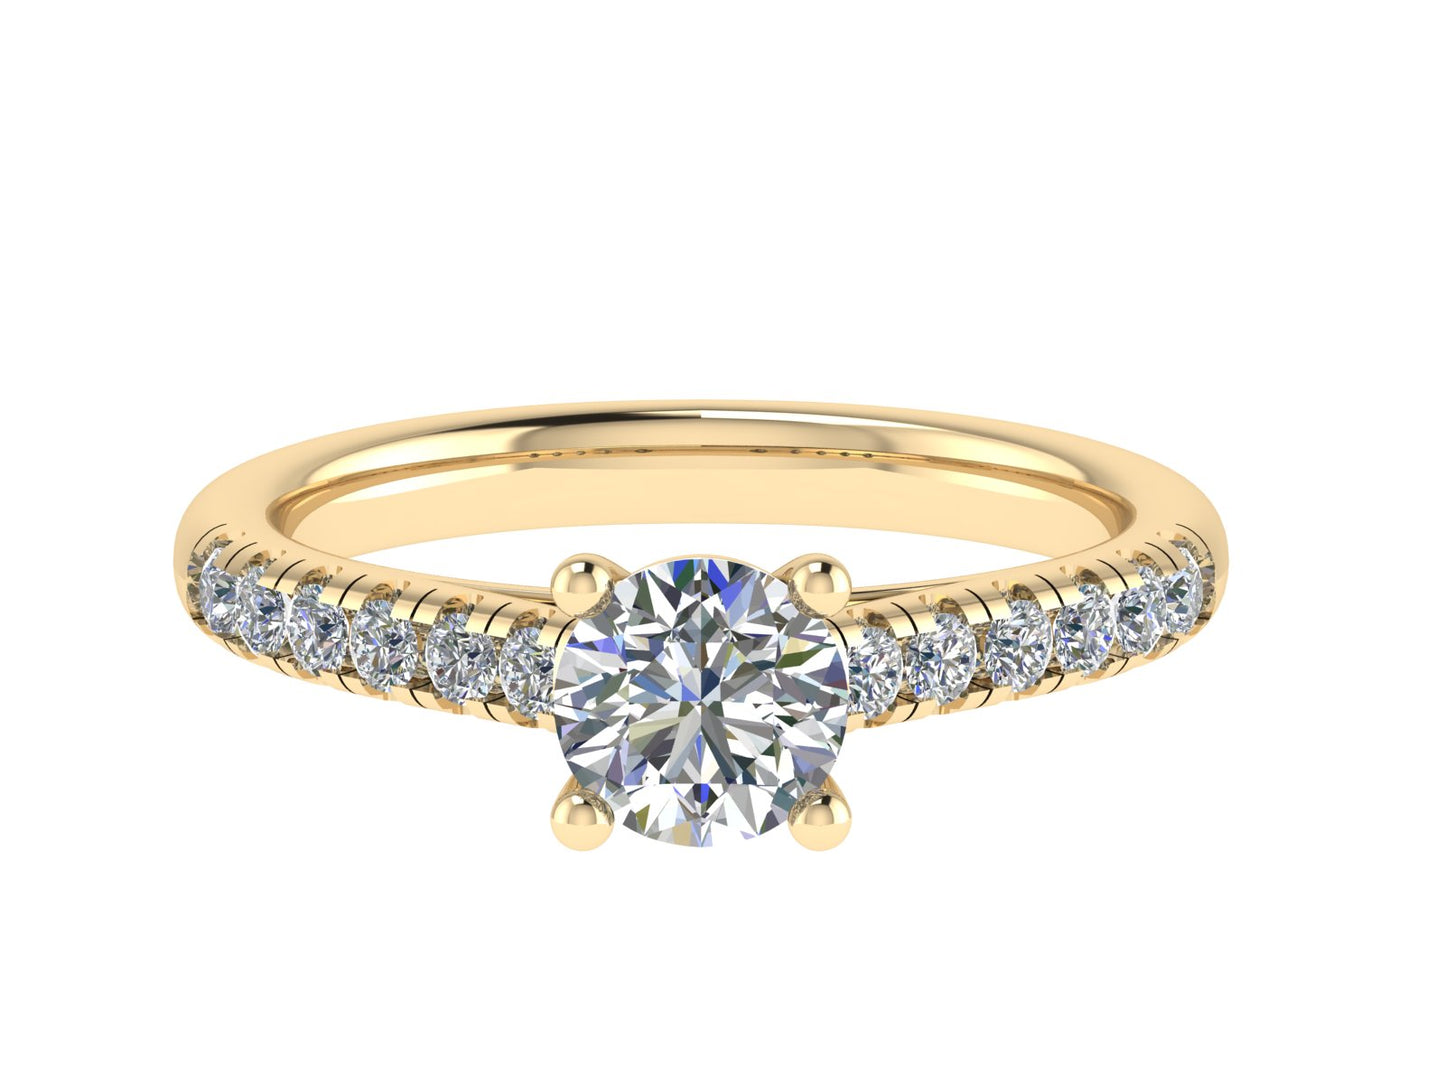 Round Ring with Diamond set shoulders 4mm